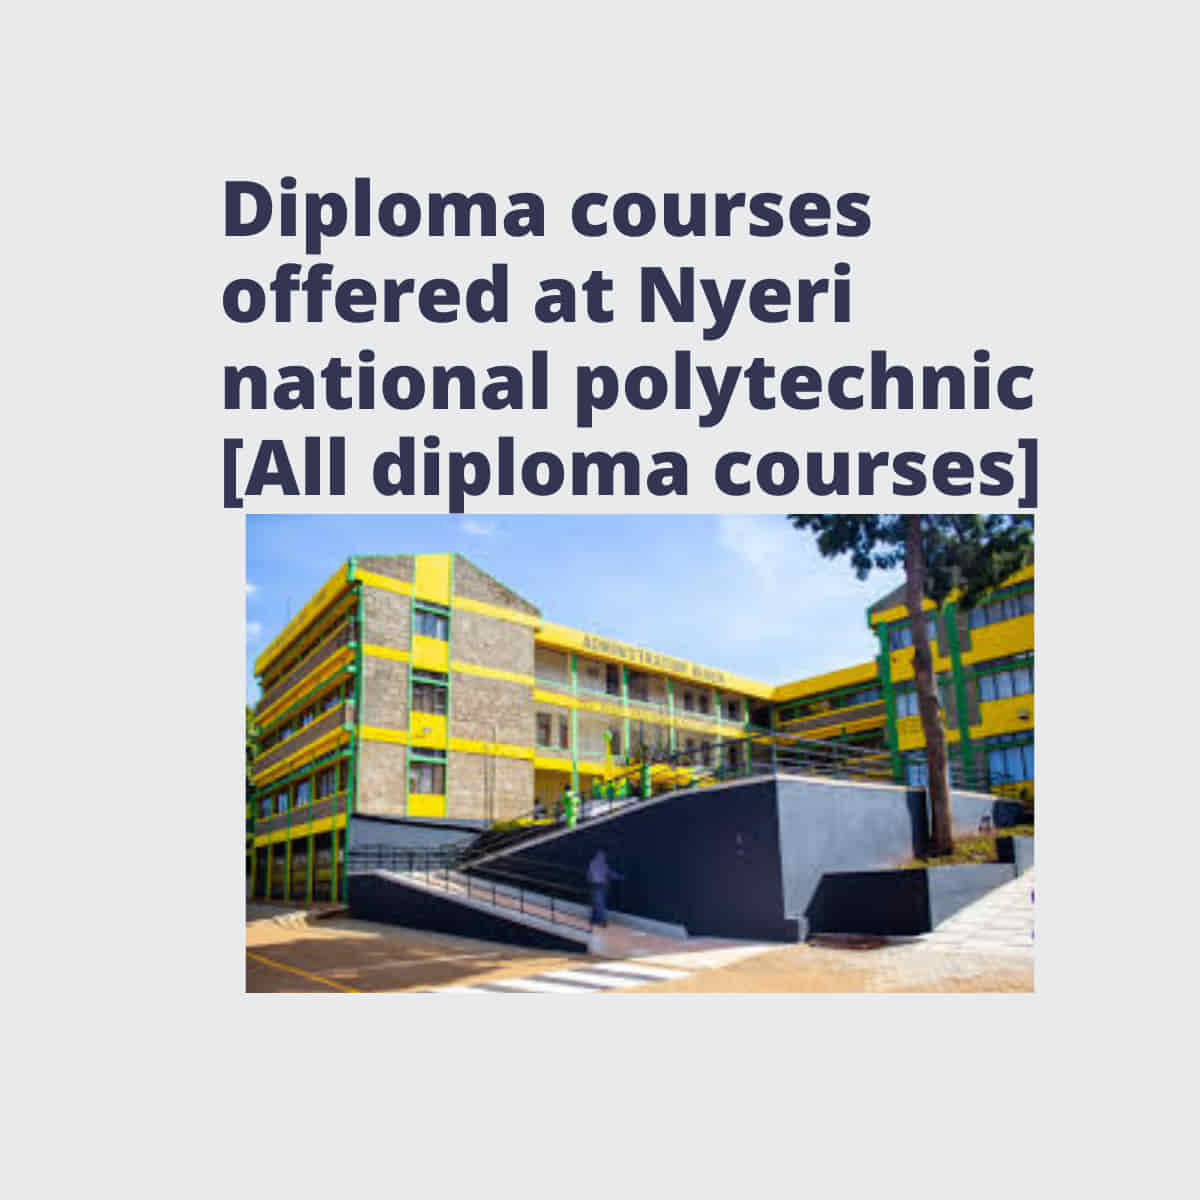 Diploma courses offered at Nyeri national polytechnic [All diploma courses]